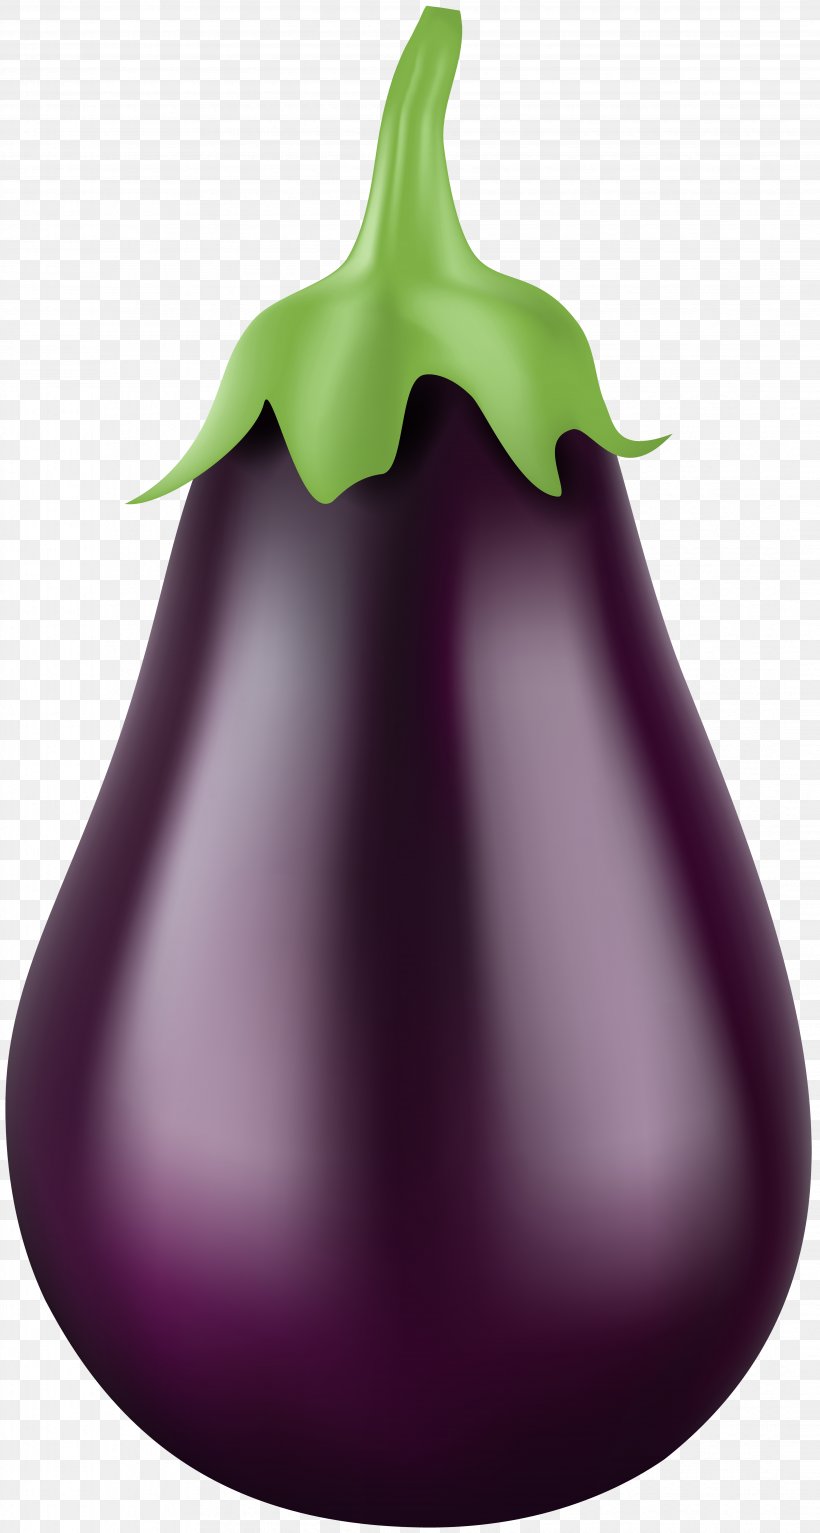 Clip Art Aubergines Vegetable Image, PNG, 4277x8000px, Aubergines, Eggplant, Fruit, Istock, Pear Download Free